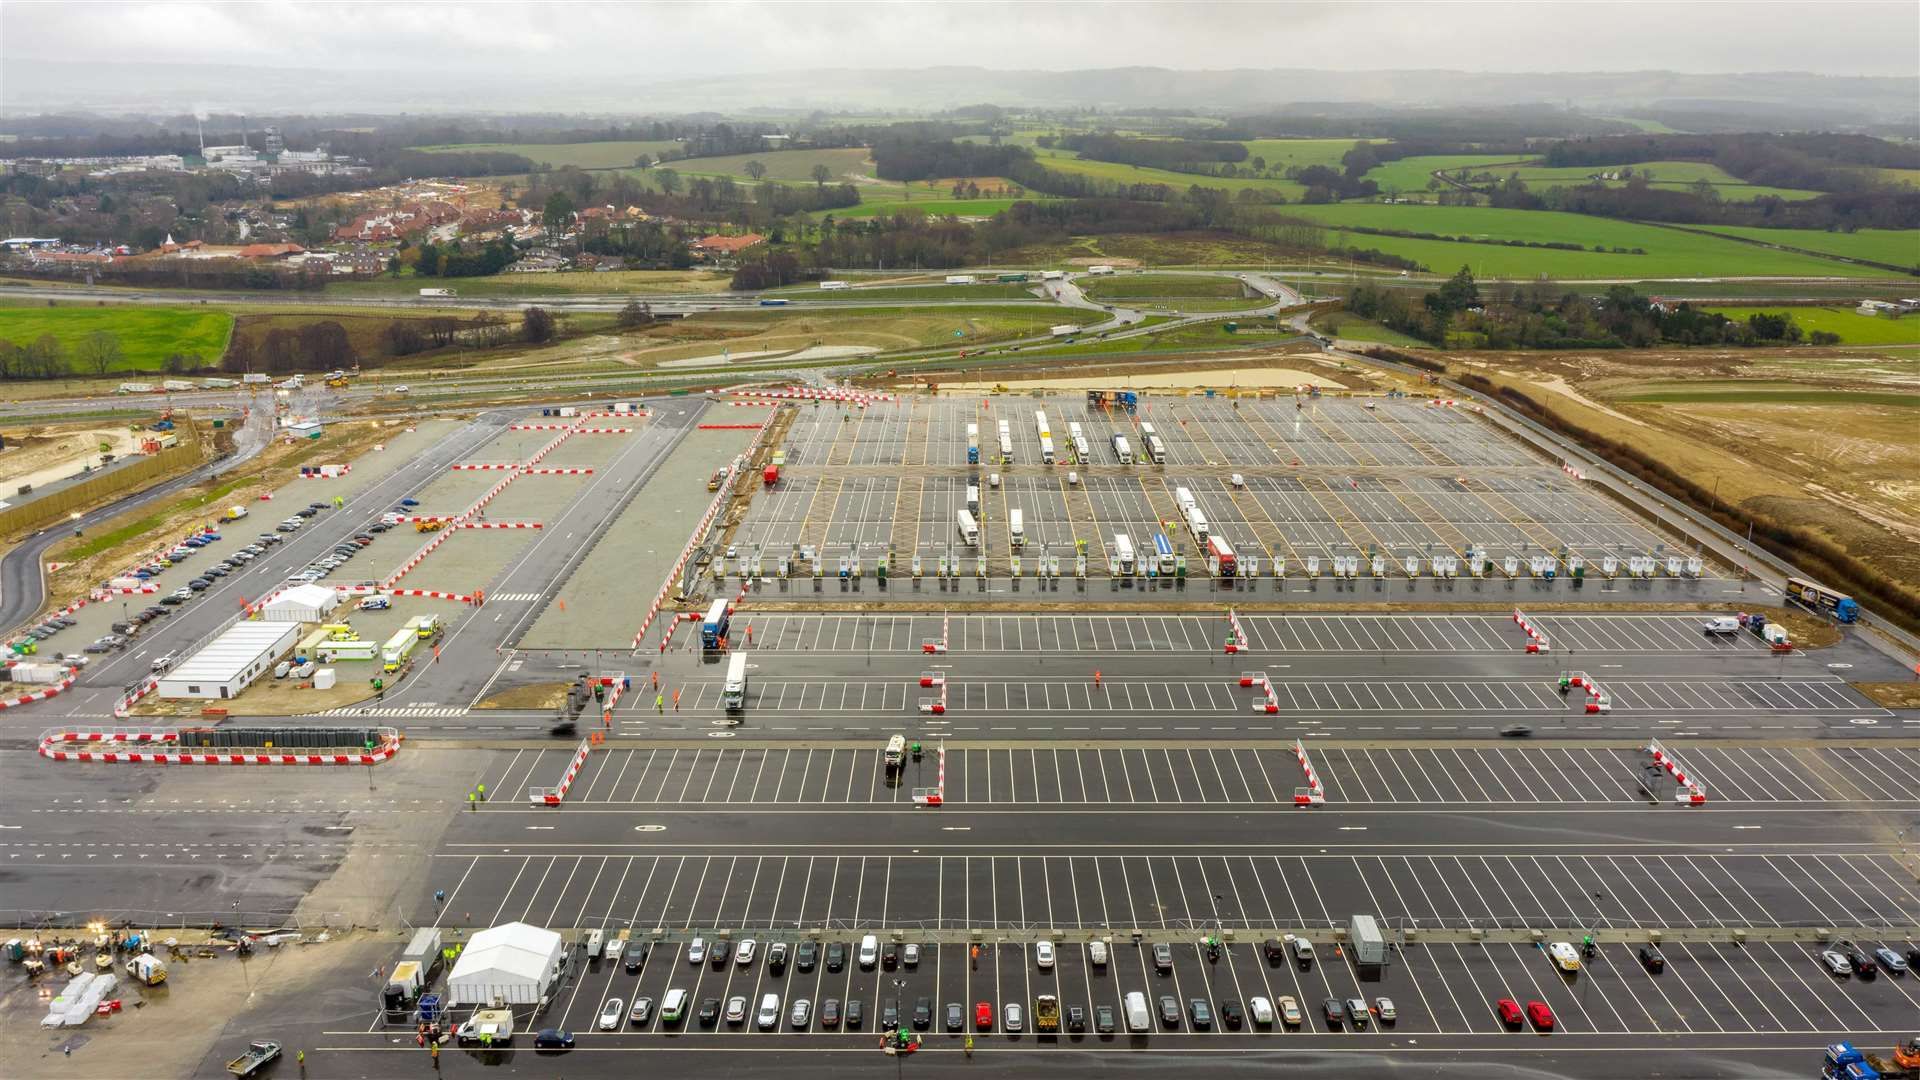 The new lorry park at Sevington from the air. Picture: Esprit Drone Services